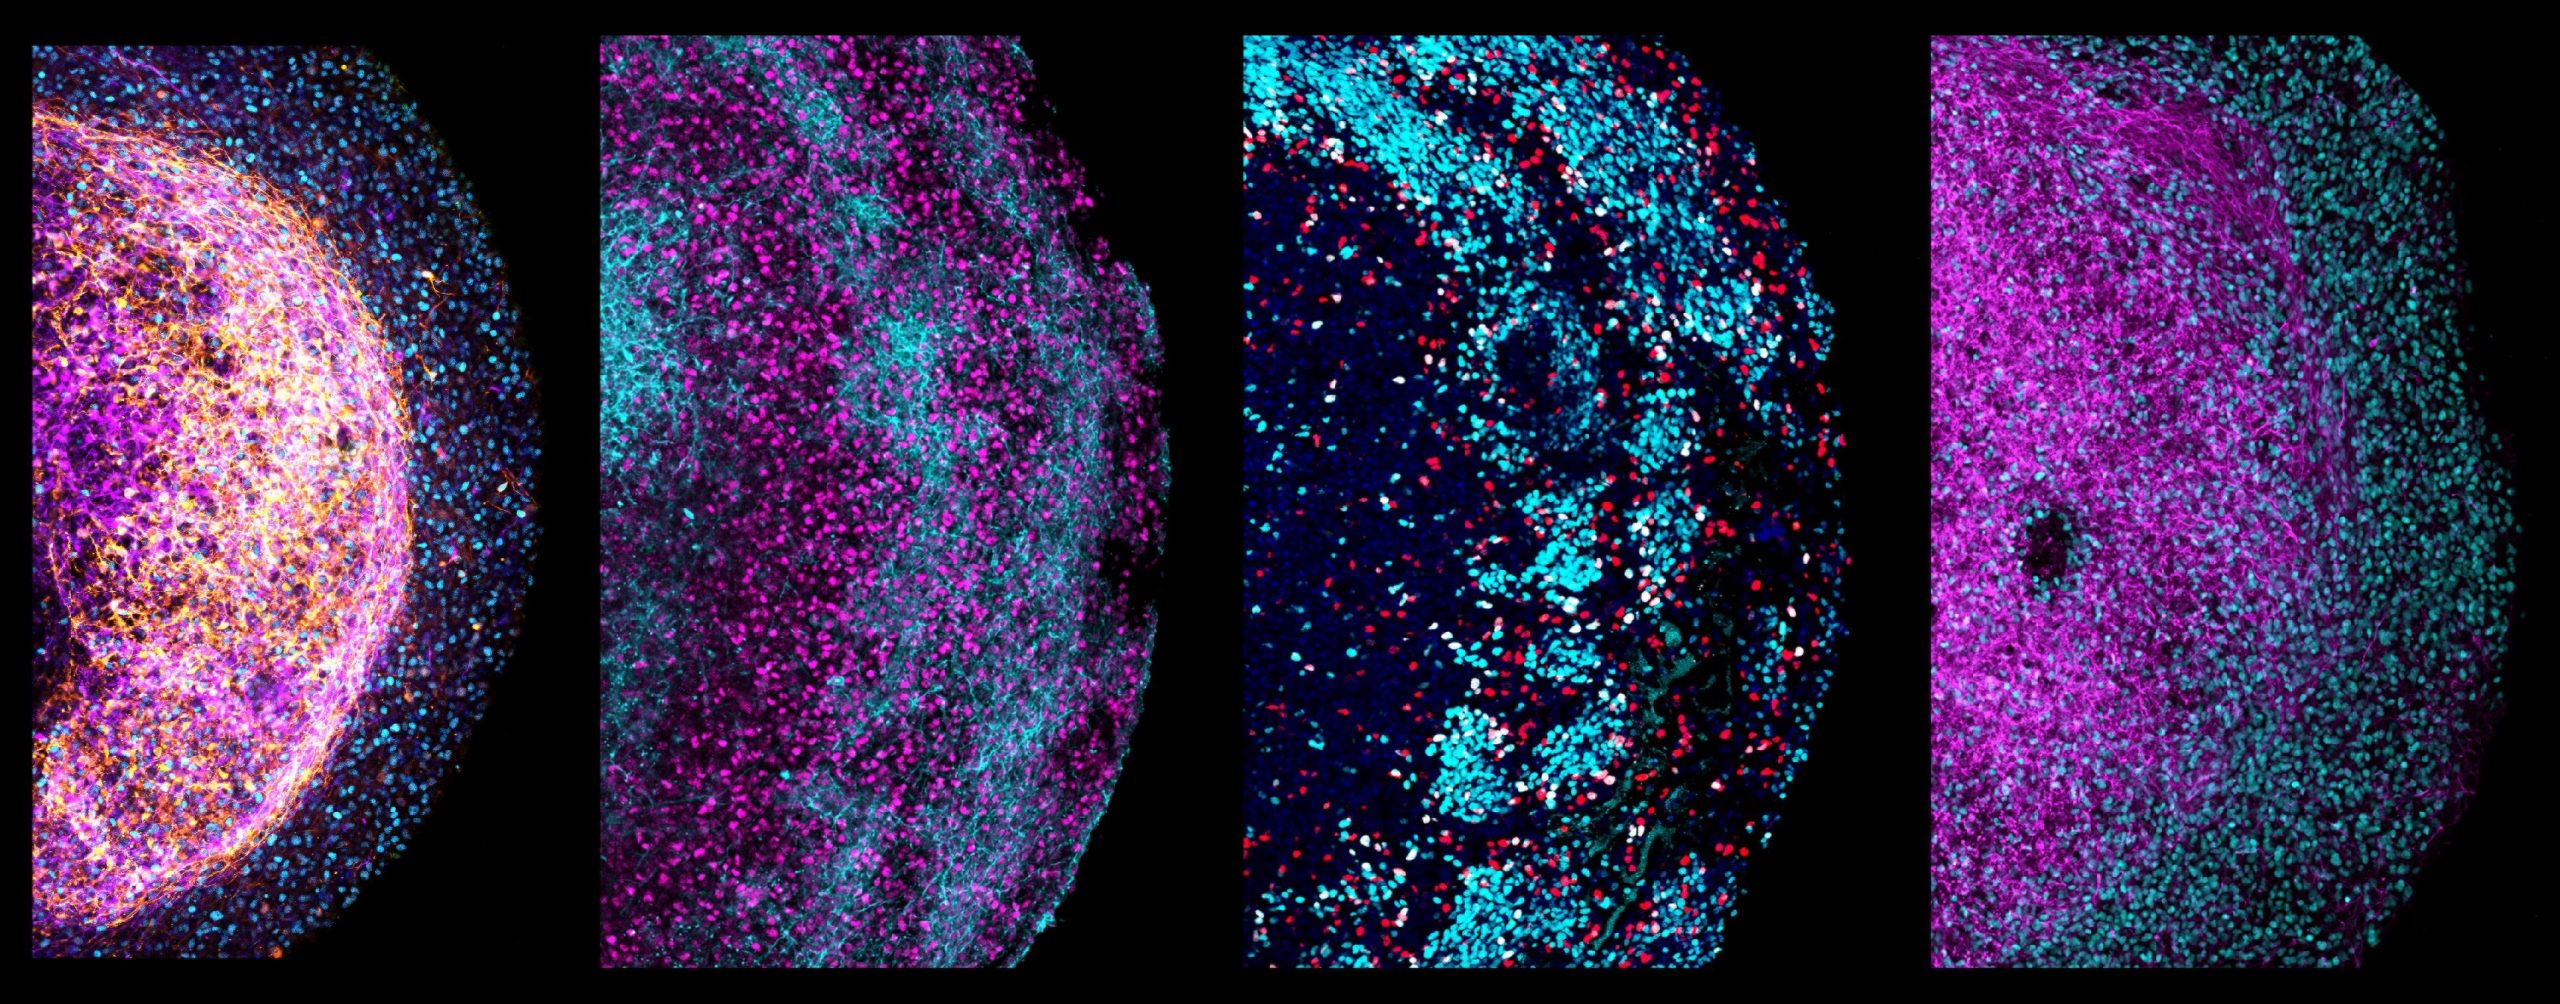 Four zoom-in images of parts of different human fetal brain organoids.